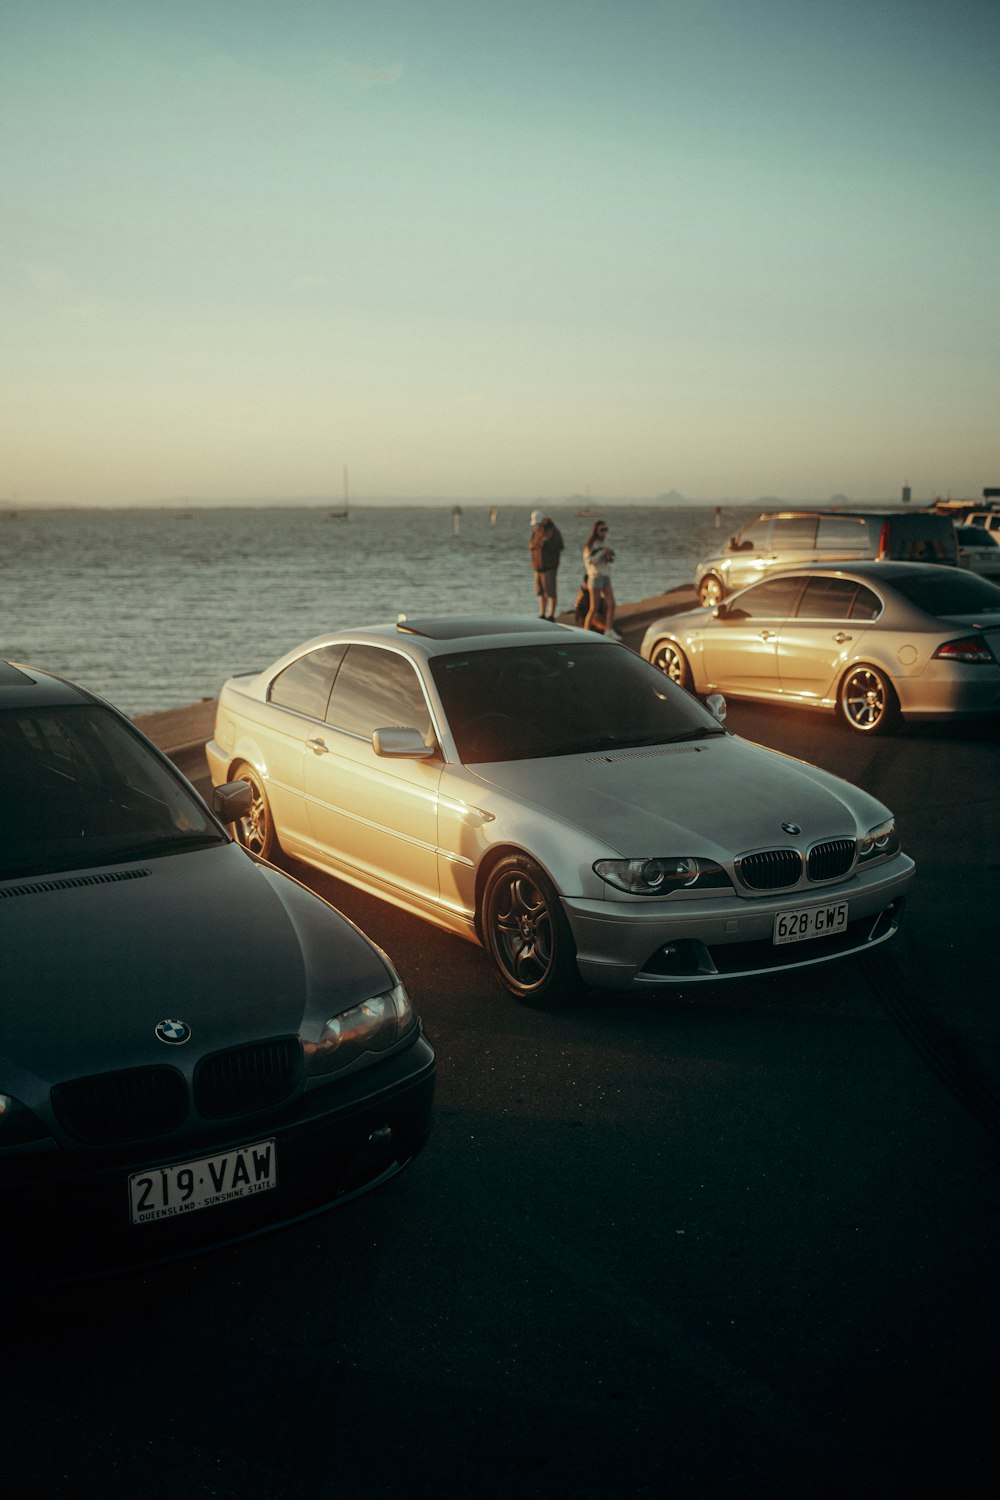 a group of cars parked next to each other near the ocean